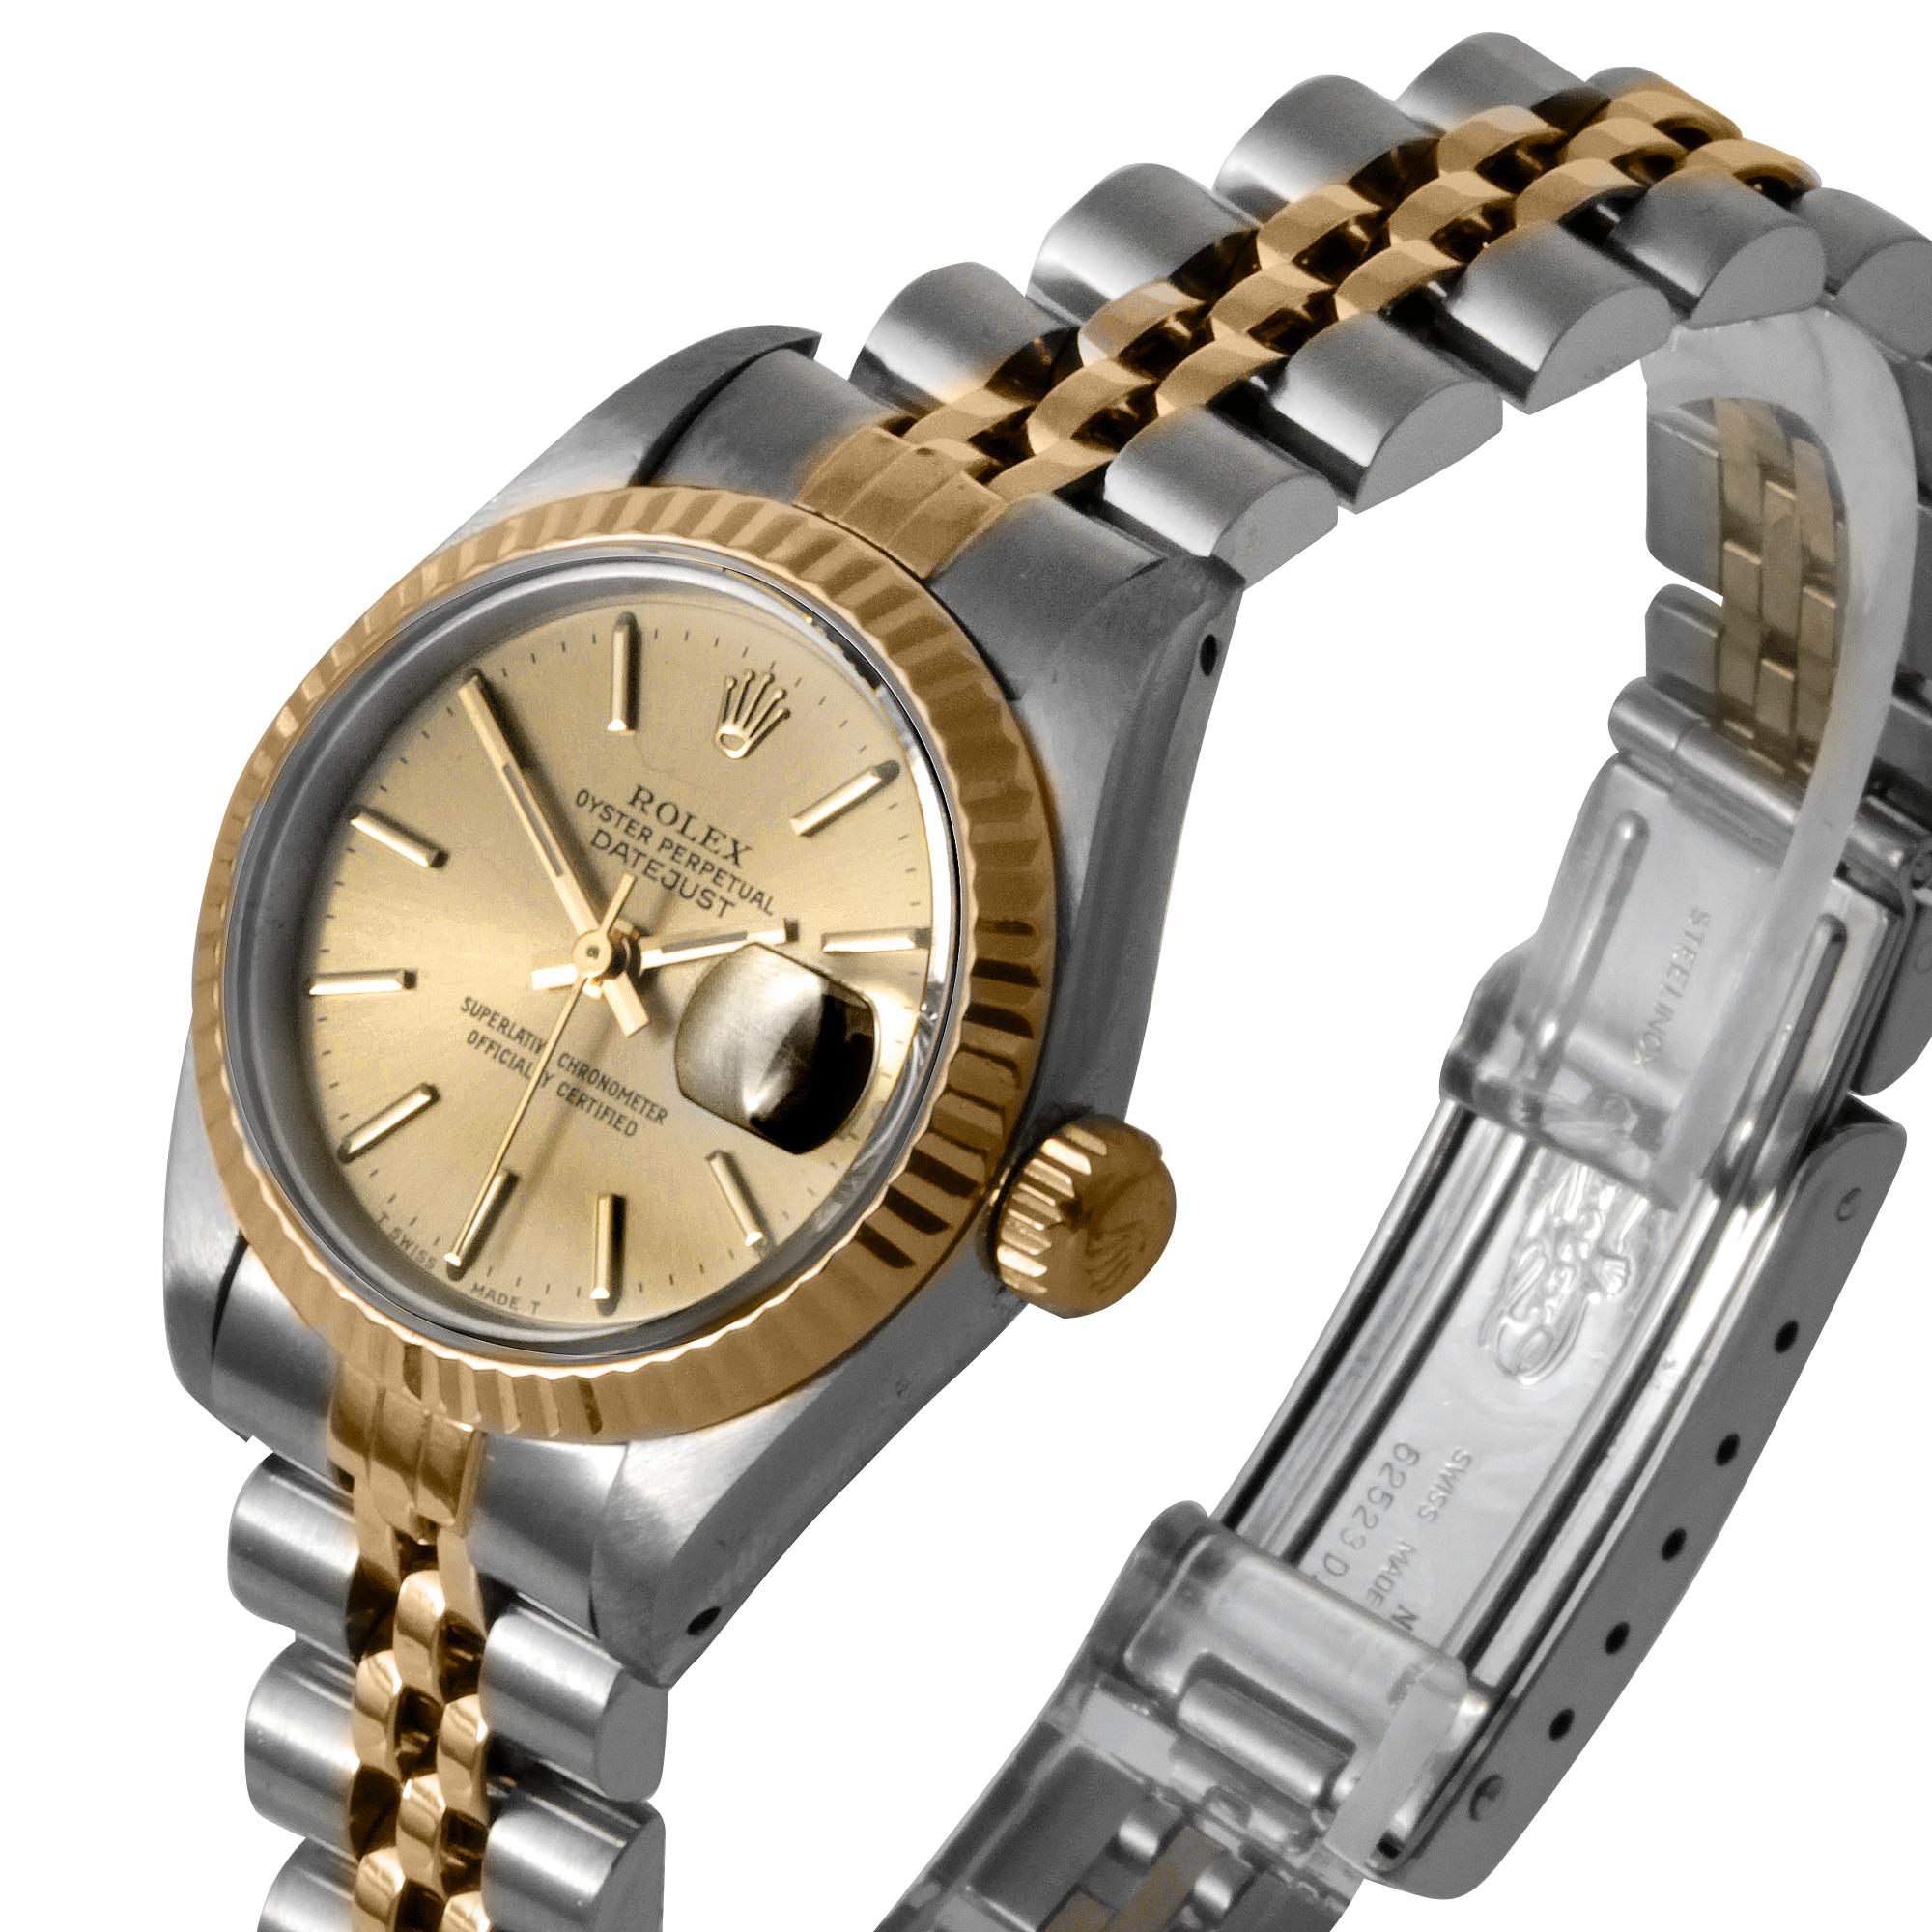 (Watch Description)
Brand - Rolex
Gender - Ladies
Model - 6917 Datejust
Metals - Stainless Steel
Case size - 26mm
Bezel - Yellow gold fluted.
Crystal - Acrylic
Movement - Mechanical Cal.2030
Dial - Champagne Stick
Wrist band - Rolex two tone